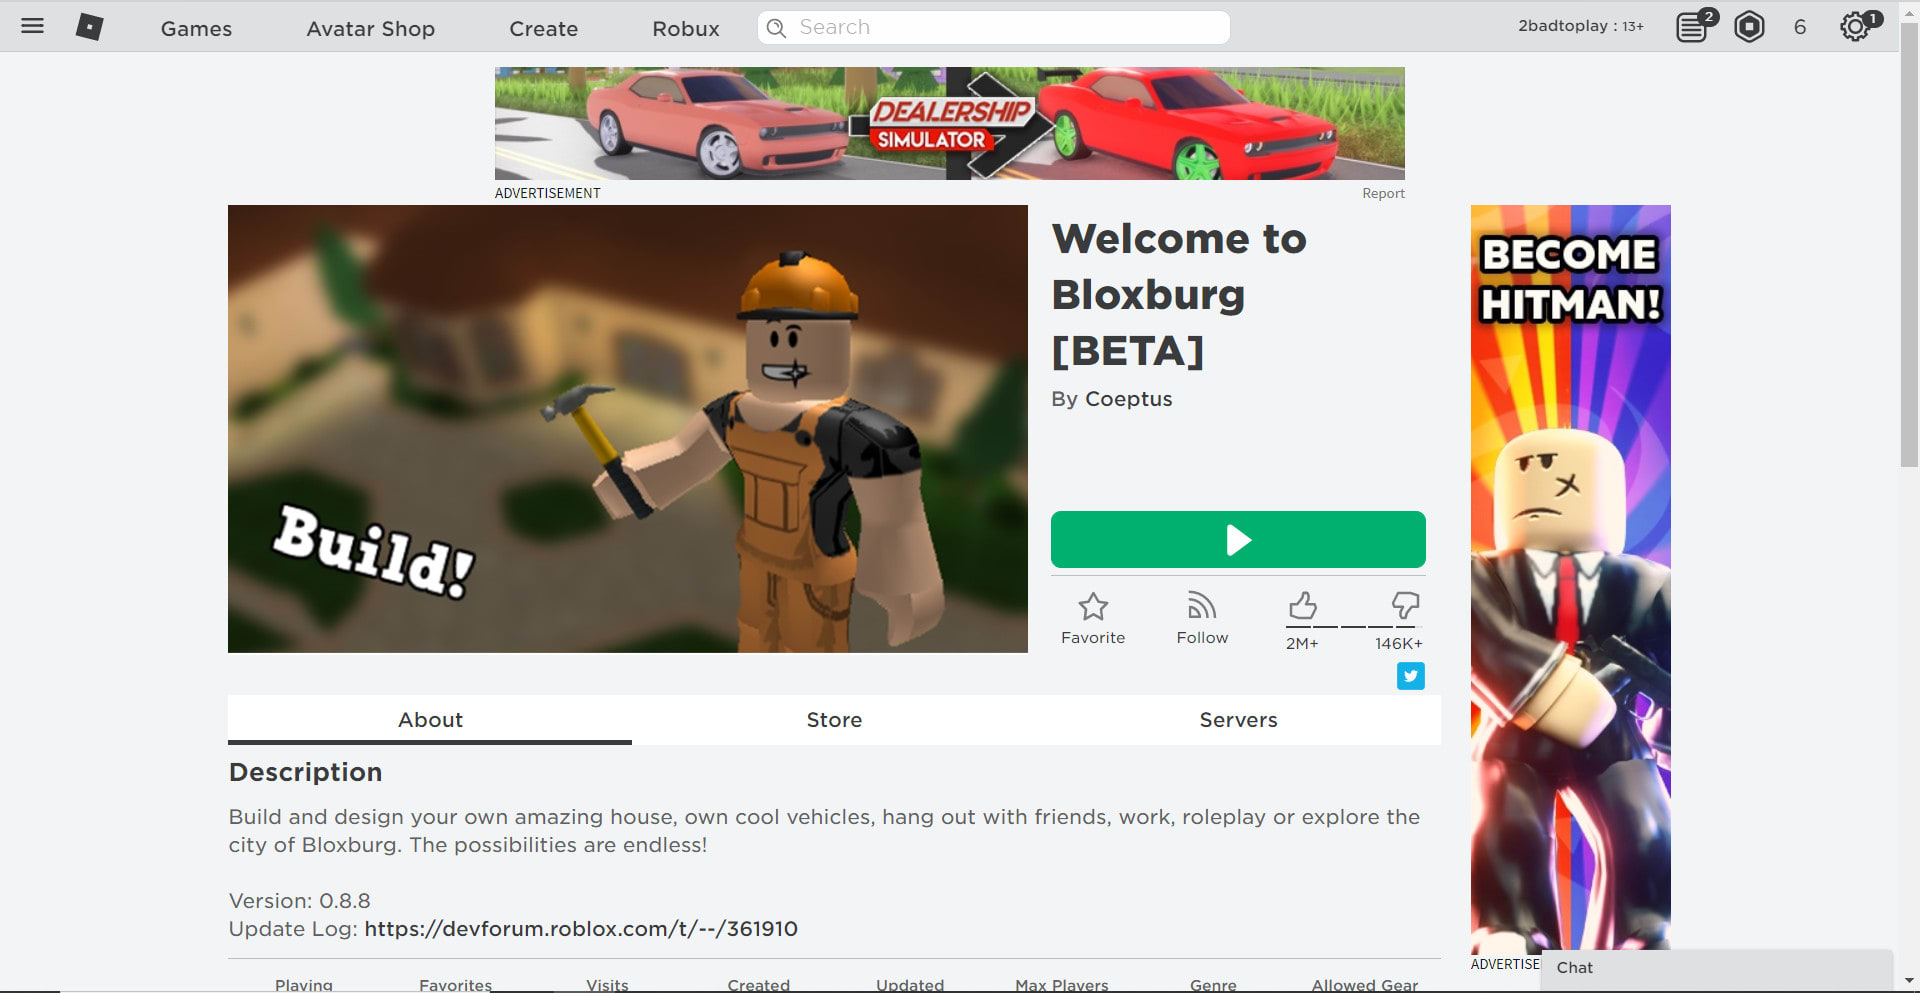 Work for you as a pizza delivery person at roblox bloxburg by Tutwelis